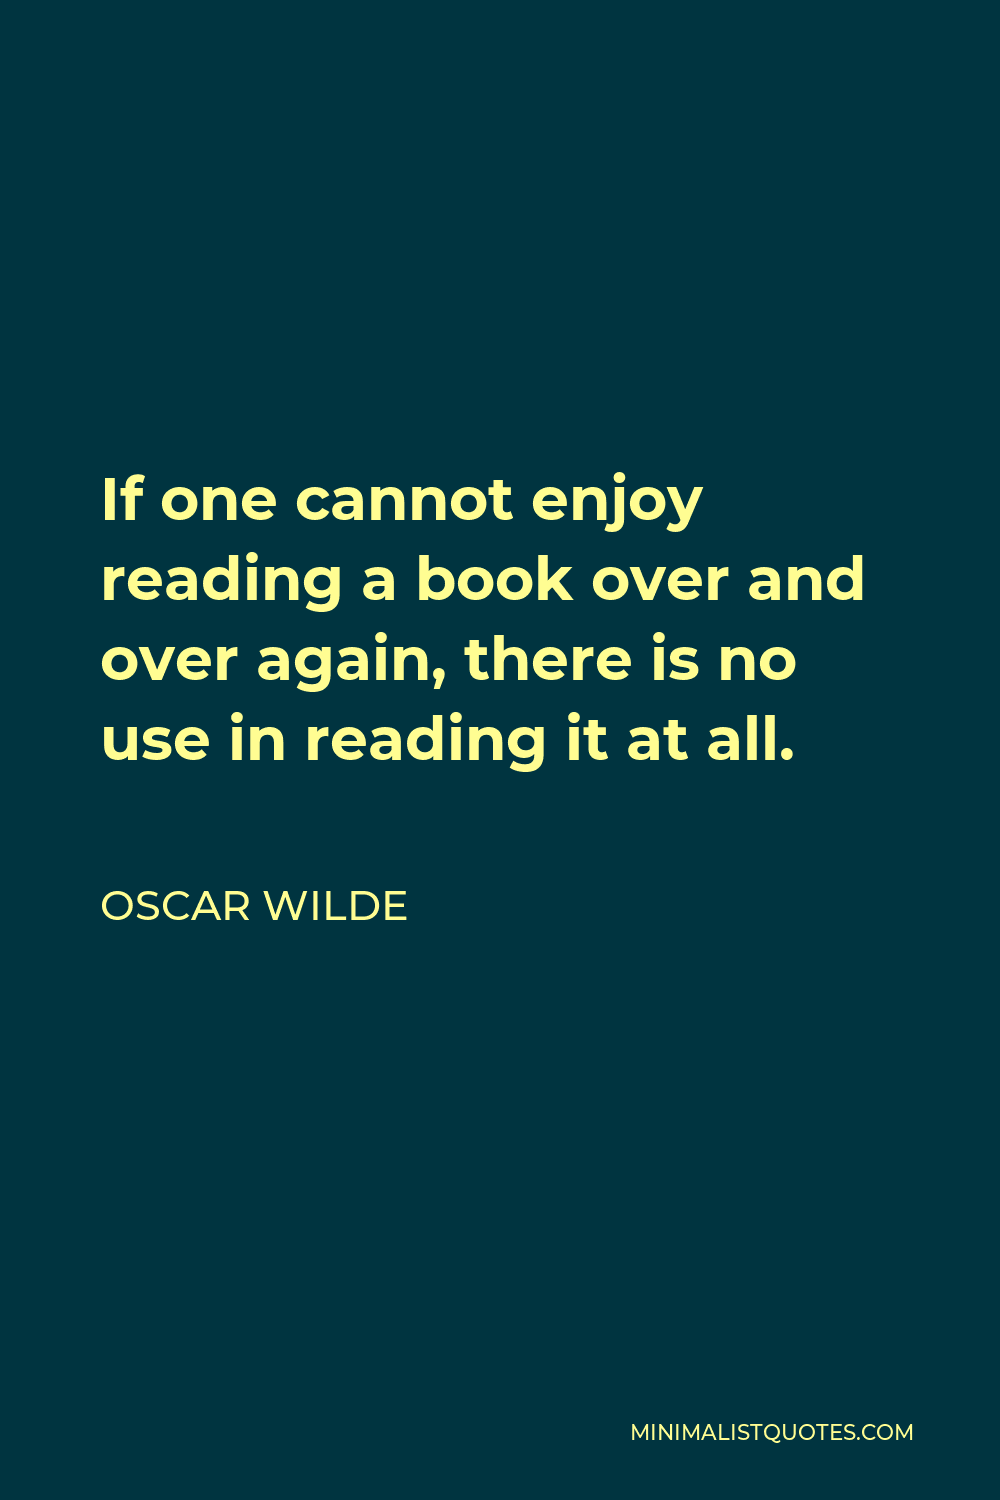 Oscar Wilde Quote - If one cannot enjoy reading a book over and over again, there is no use in reading it at all.